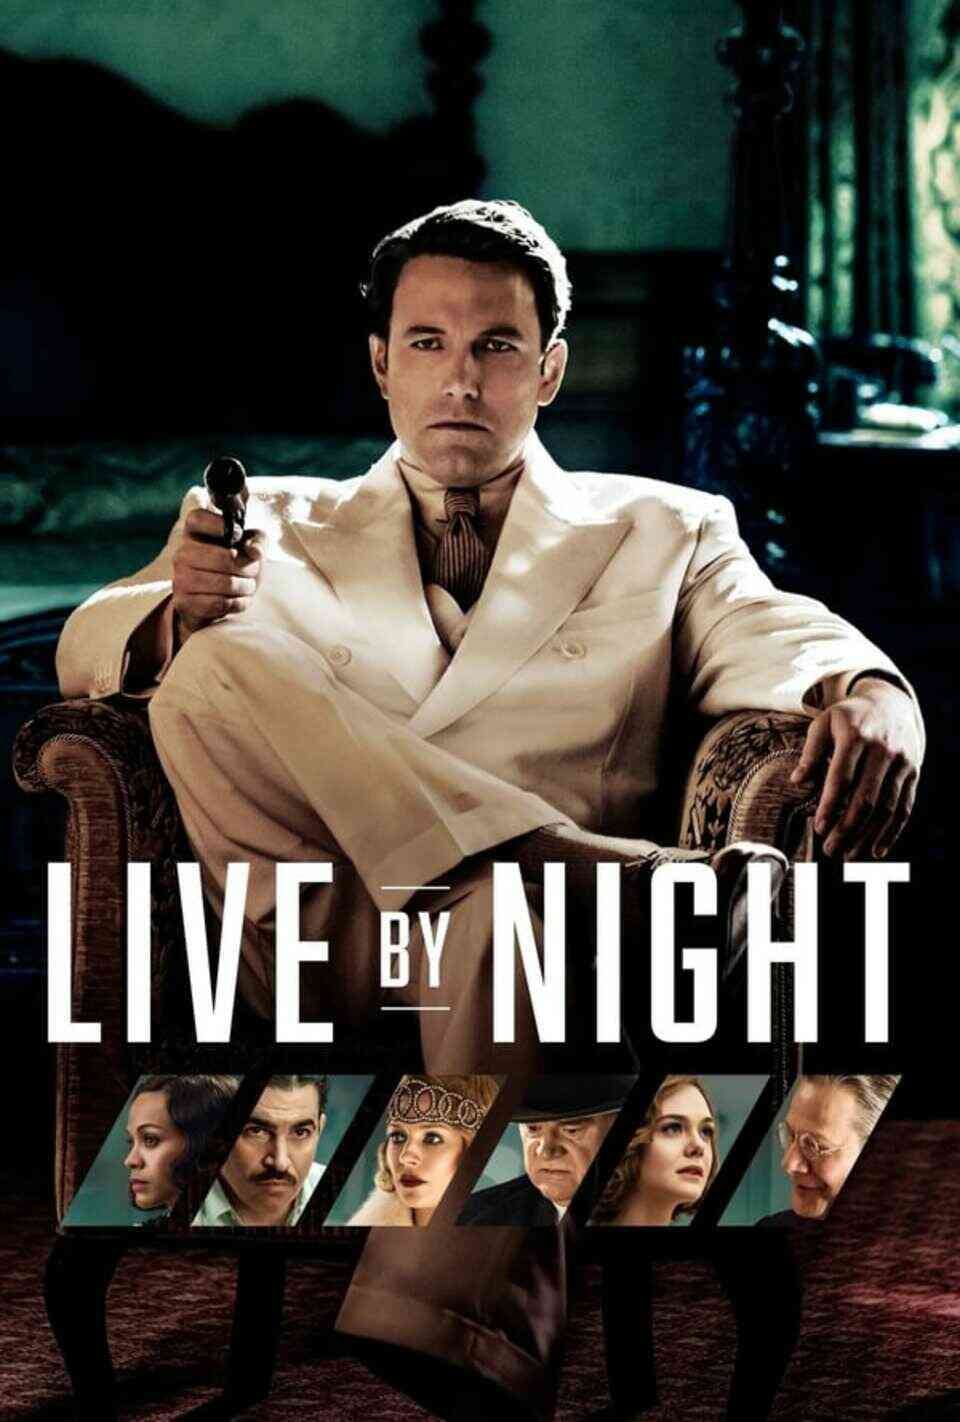 Read Live By Night screenplay (poster)